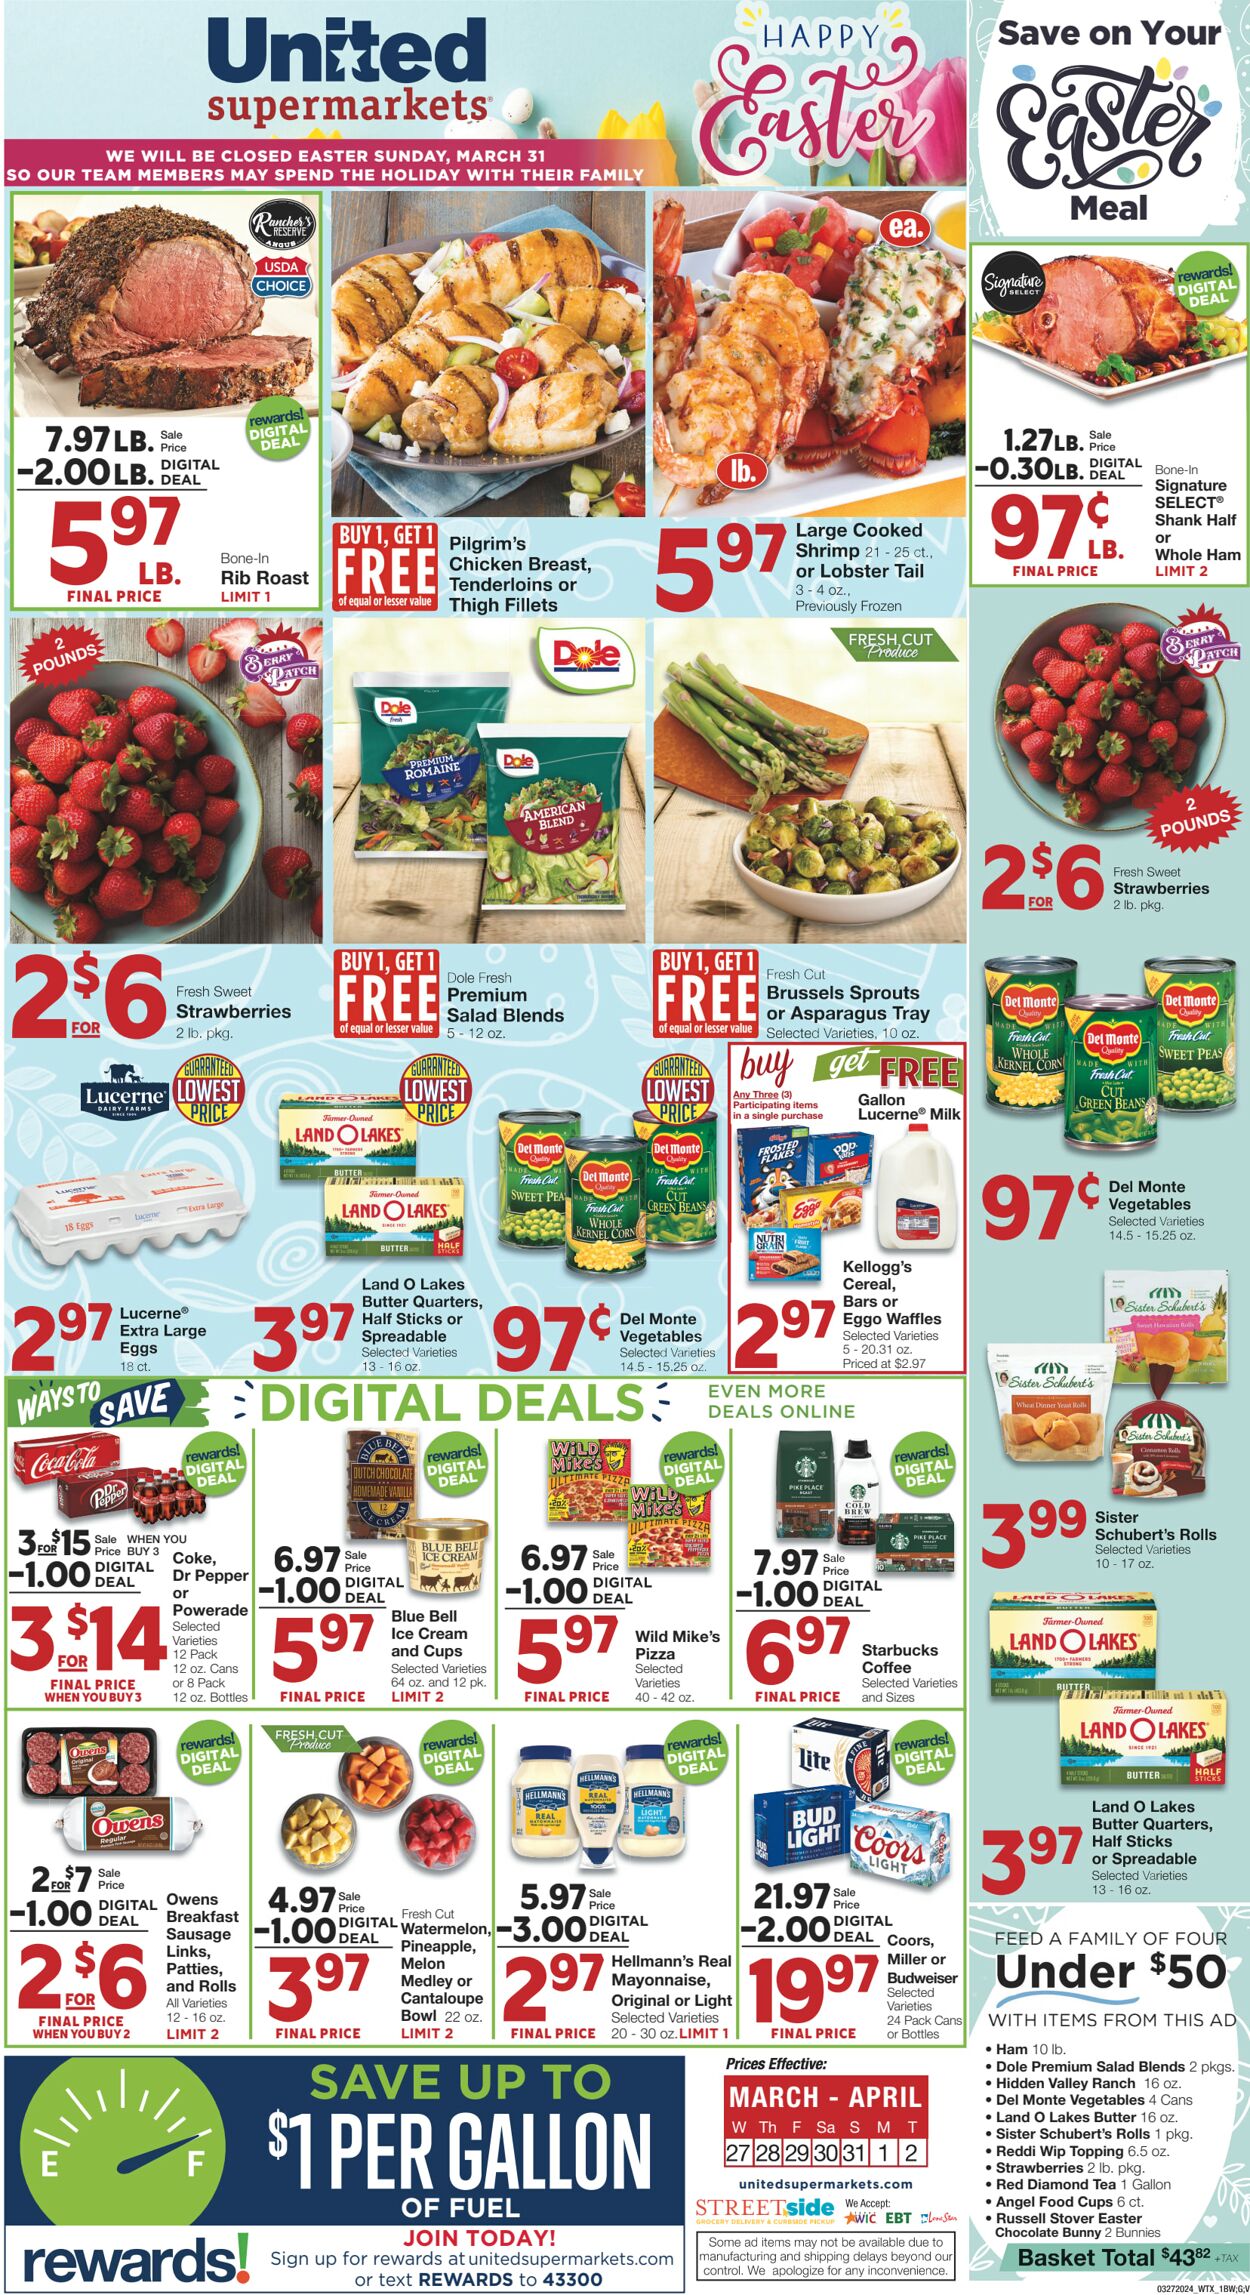 United Supermarkets Promotional weekly ads